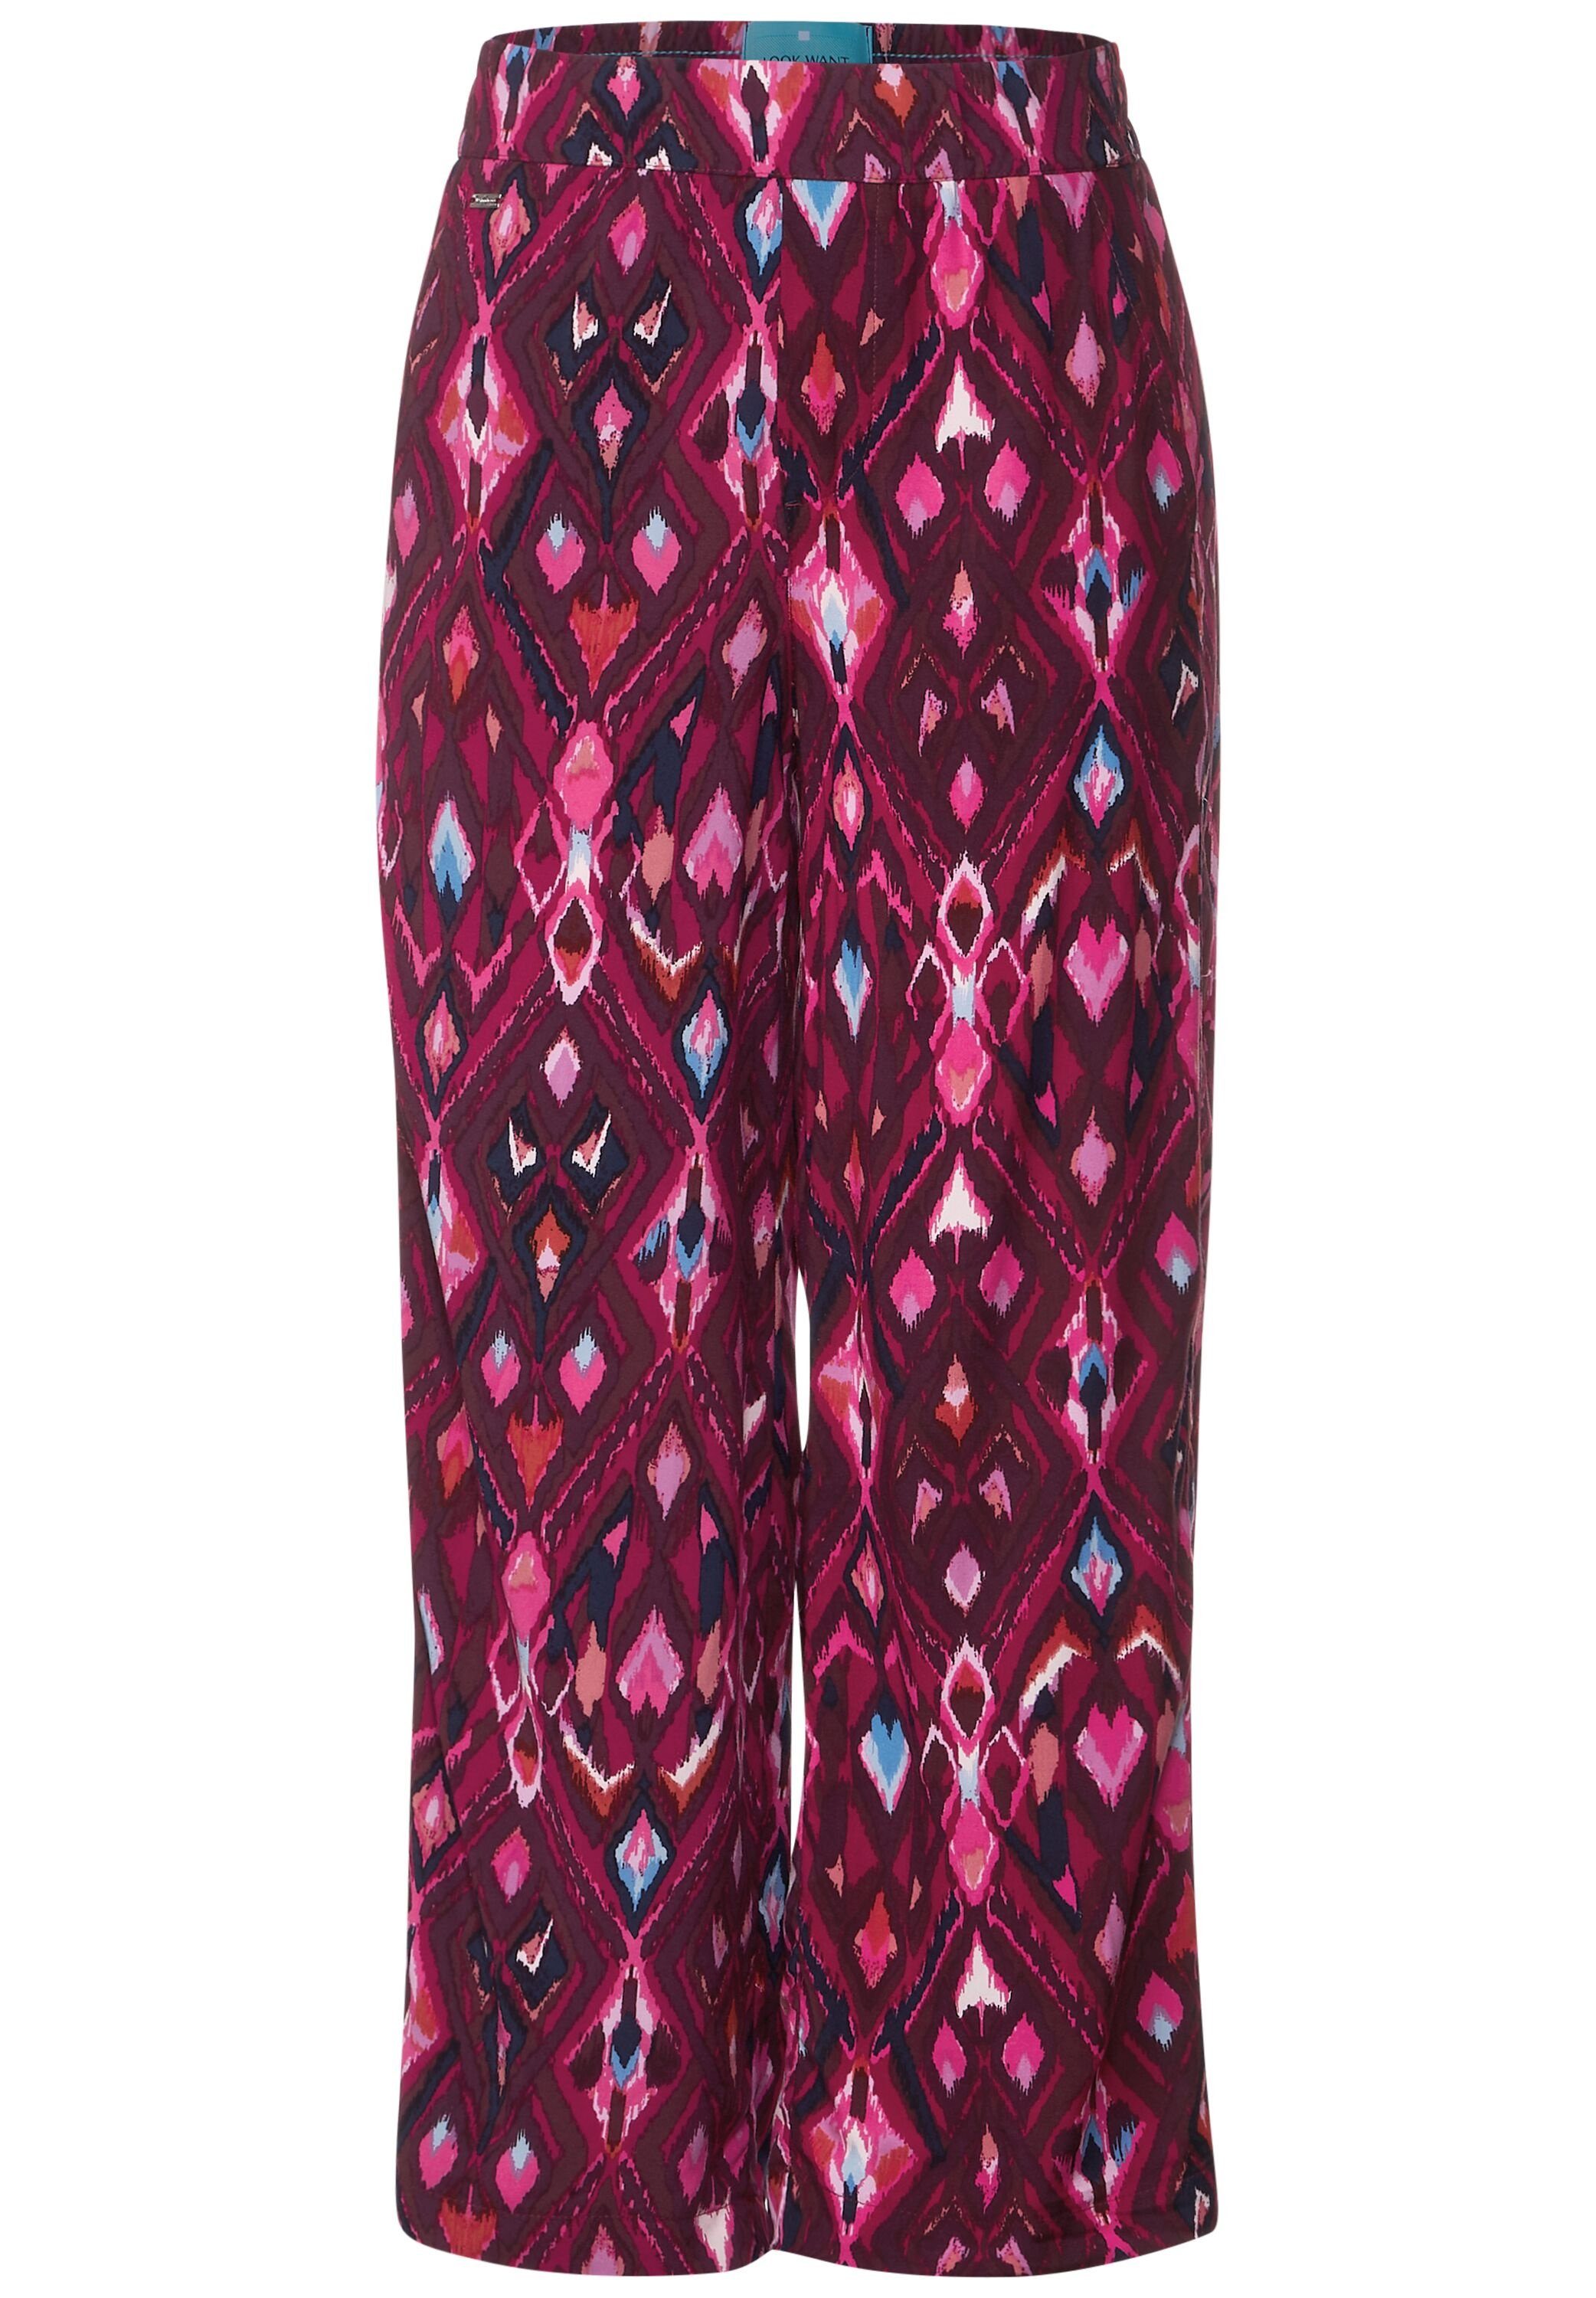 Hose Loose mit berry Fit Ikatprint Stoffhose ONE STREET tamed